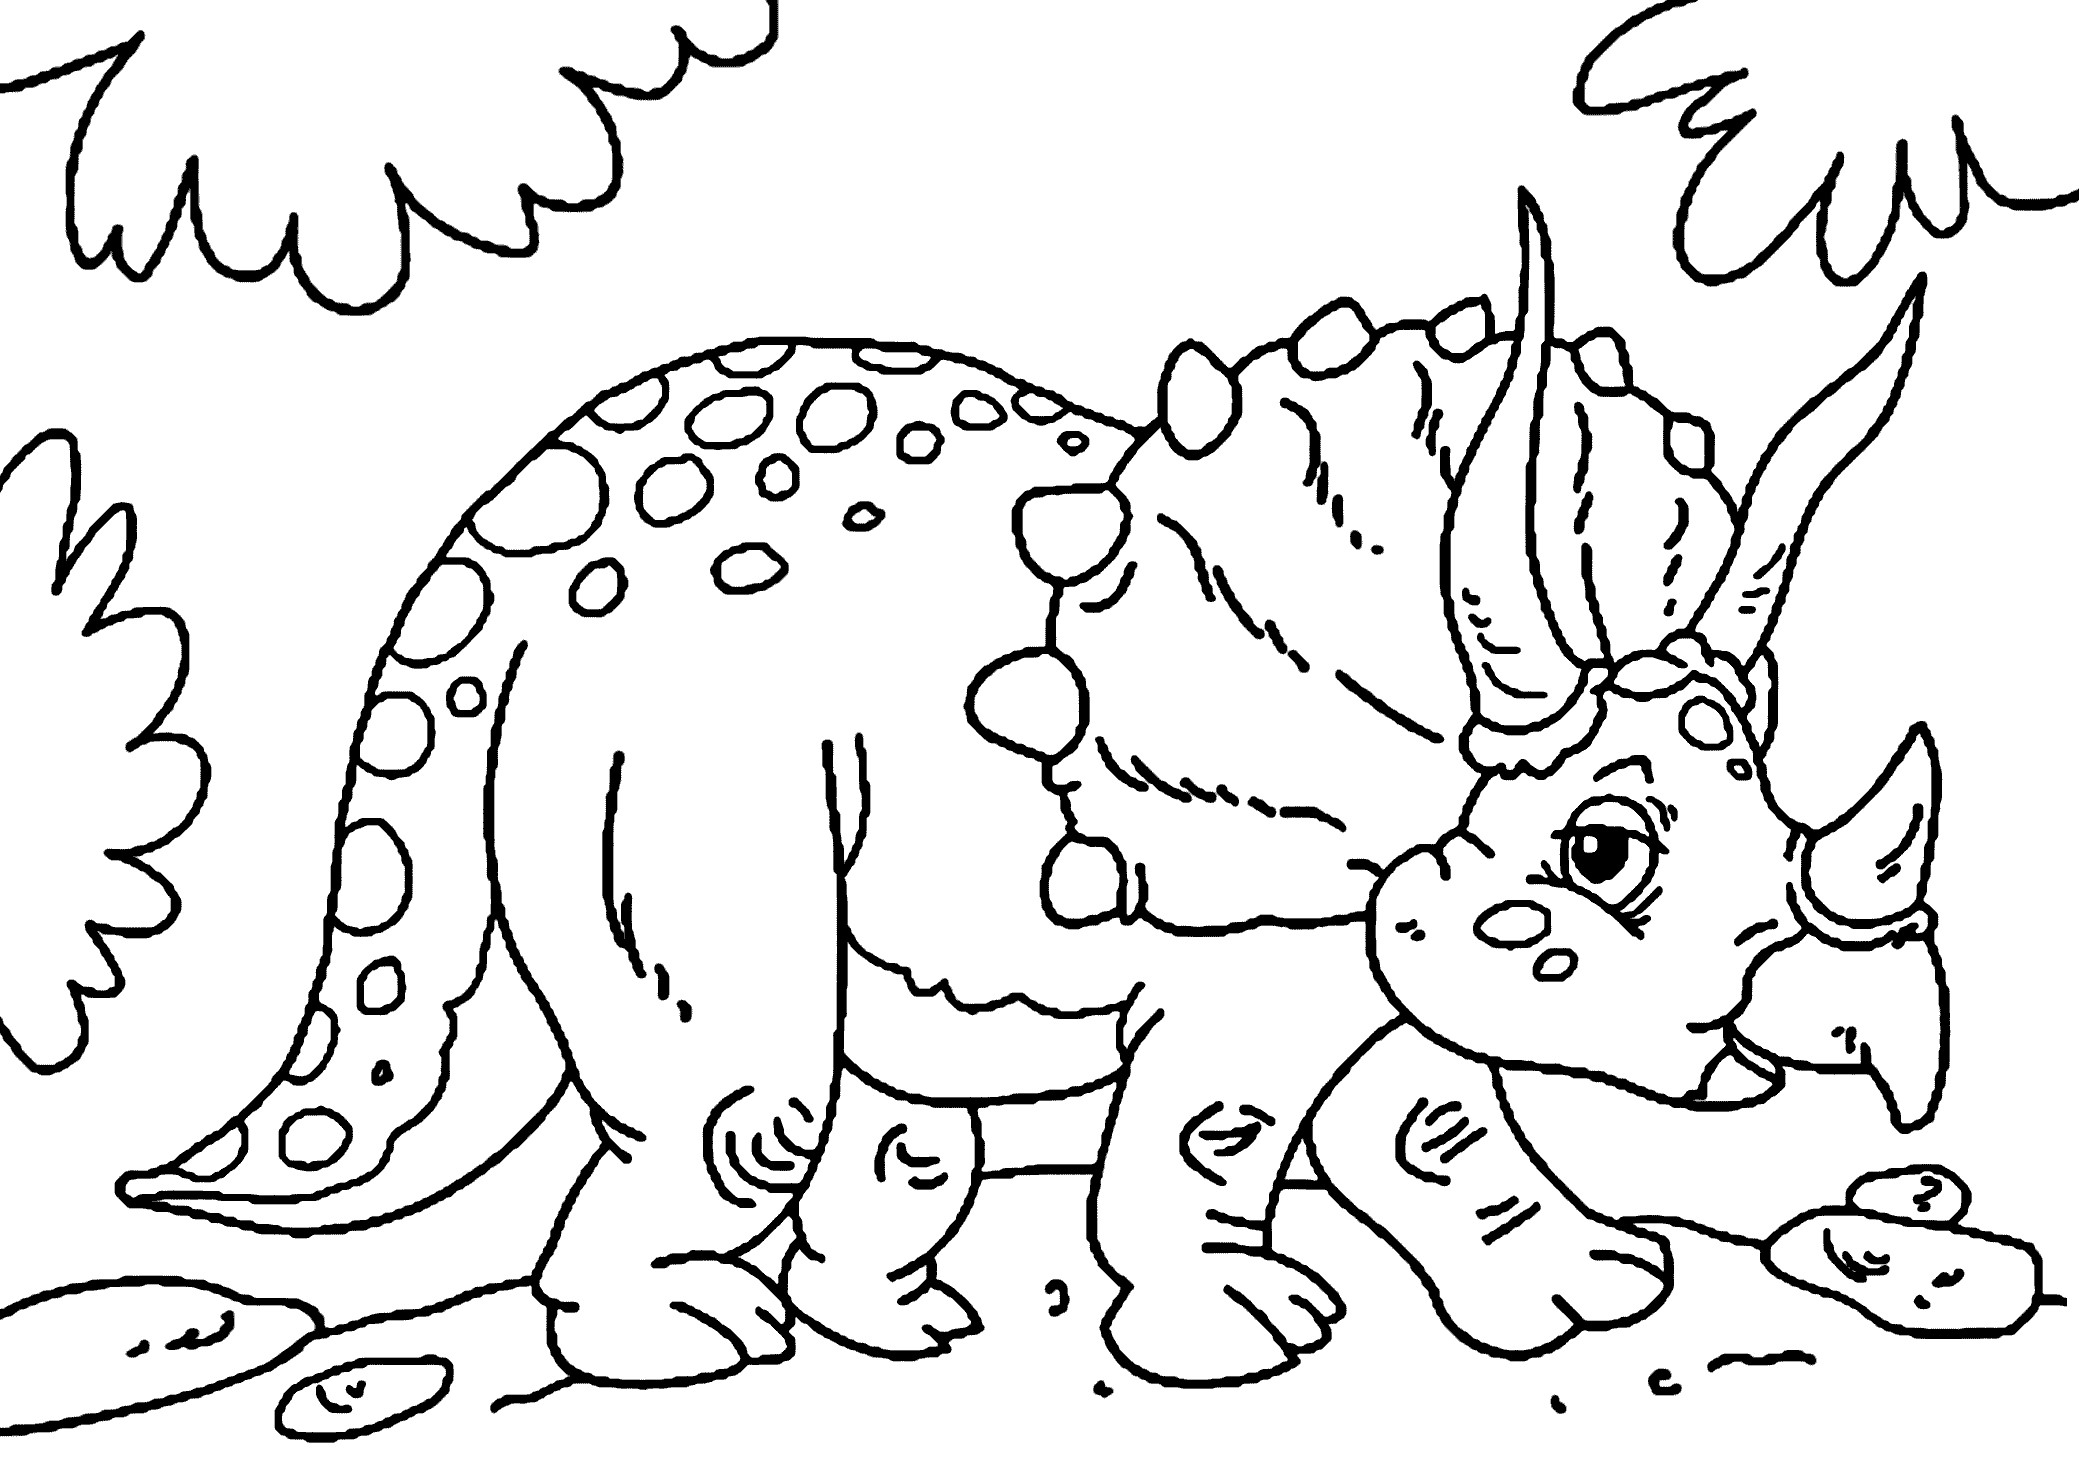 Coloring Pages For Boys Dinosaur
 Cute little triceratops dinosaur coloring pages for kids